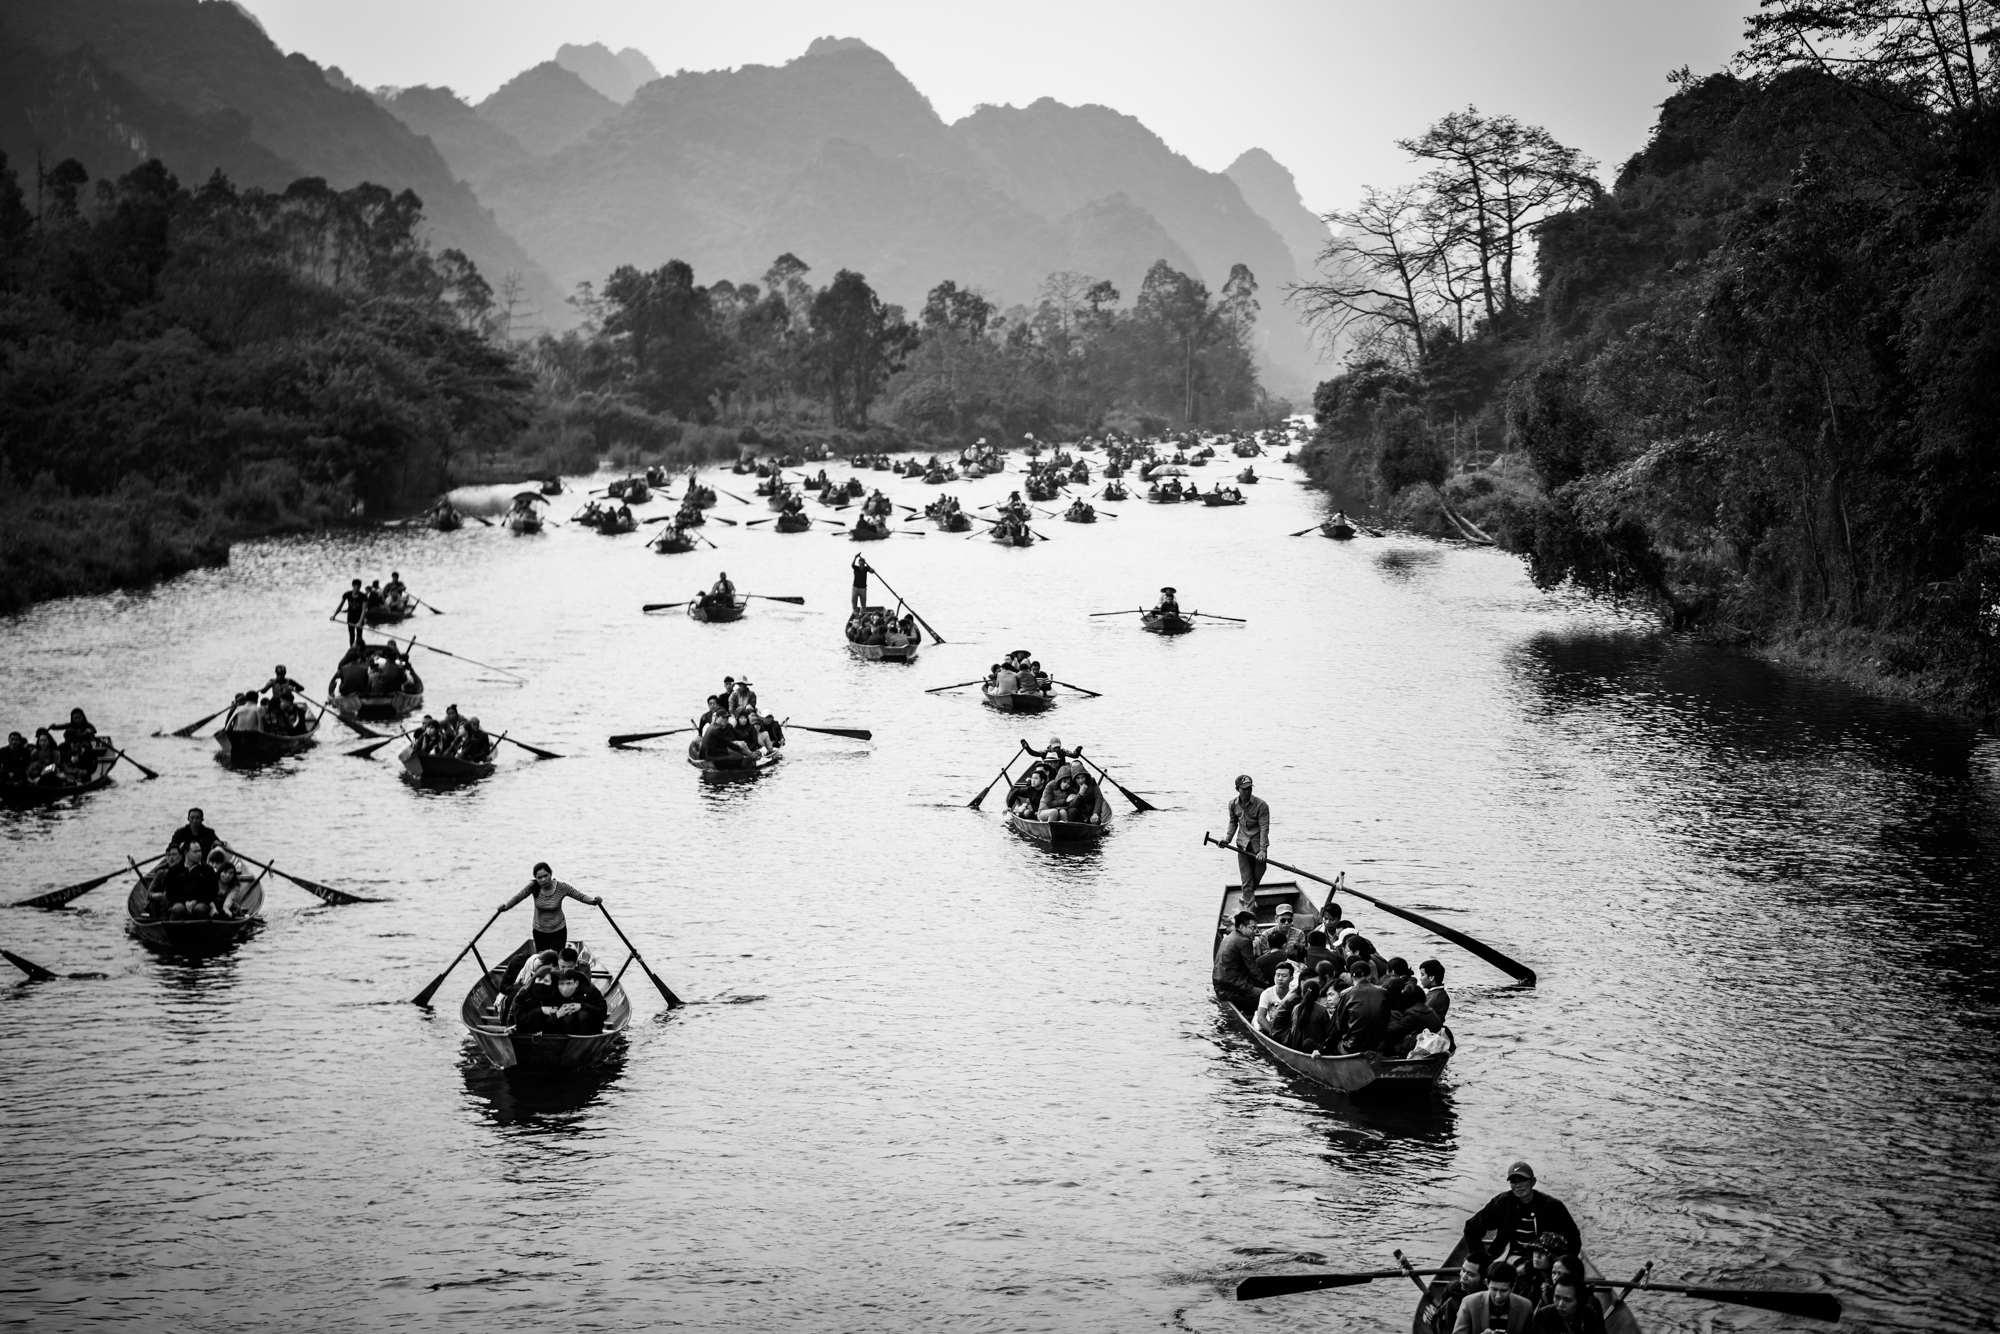 Boats of tourists making a pilgrimage trip to a pagoda on the Perfume River in northern Vietnam.